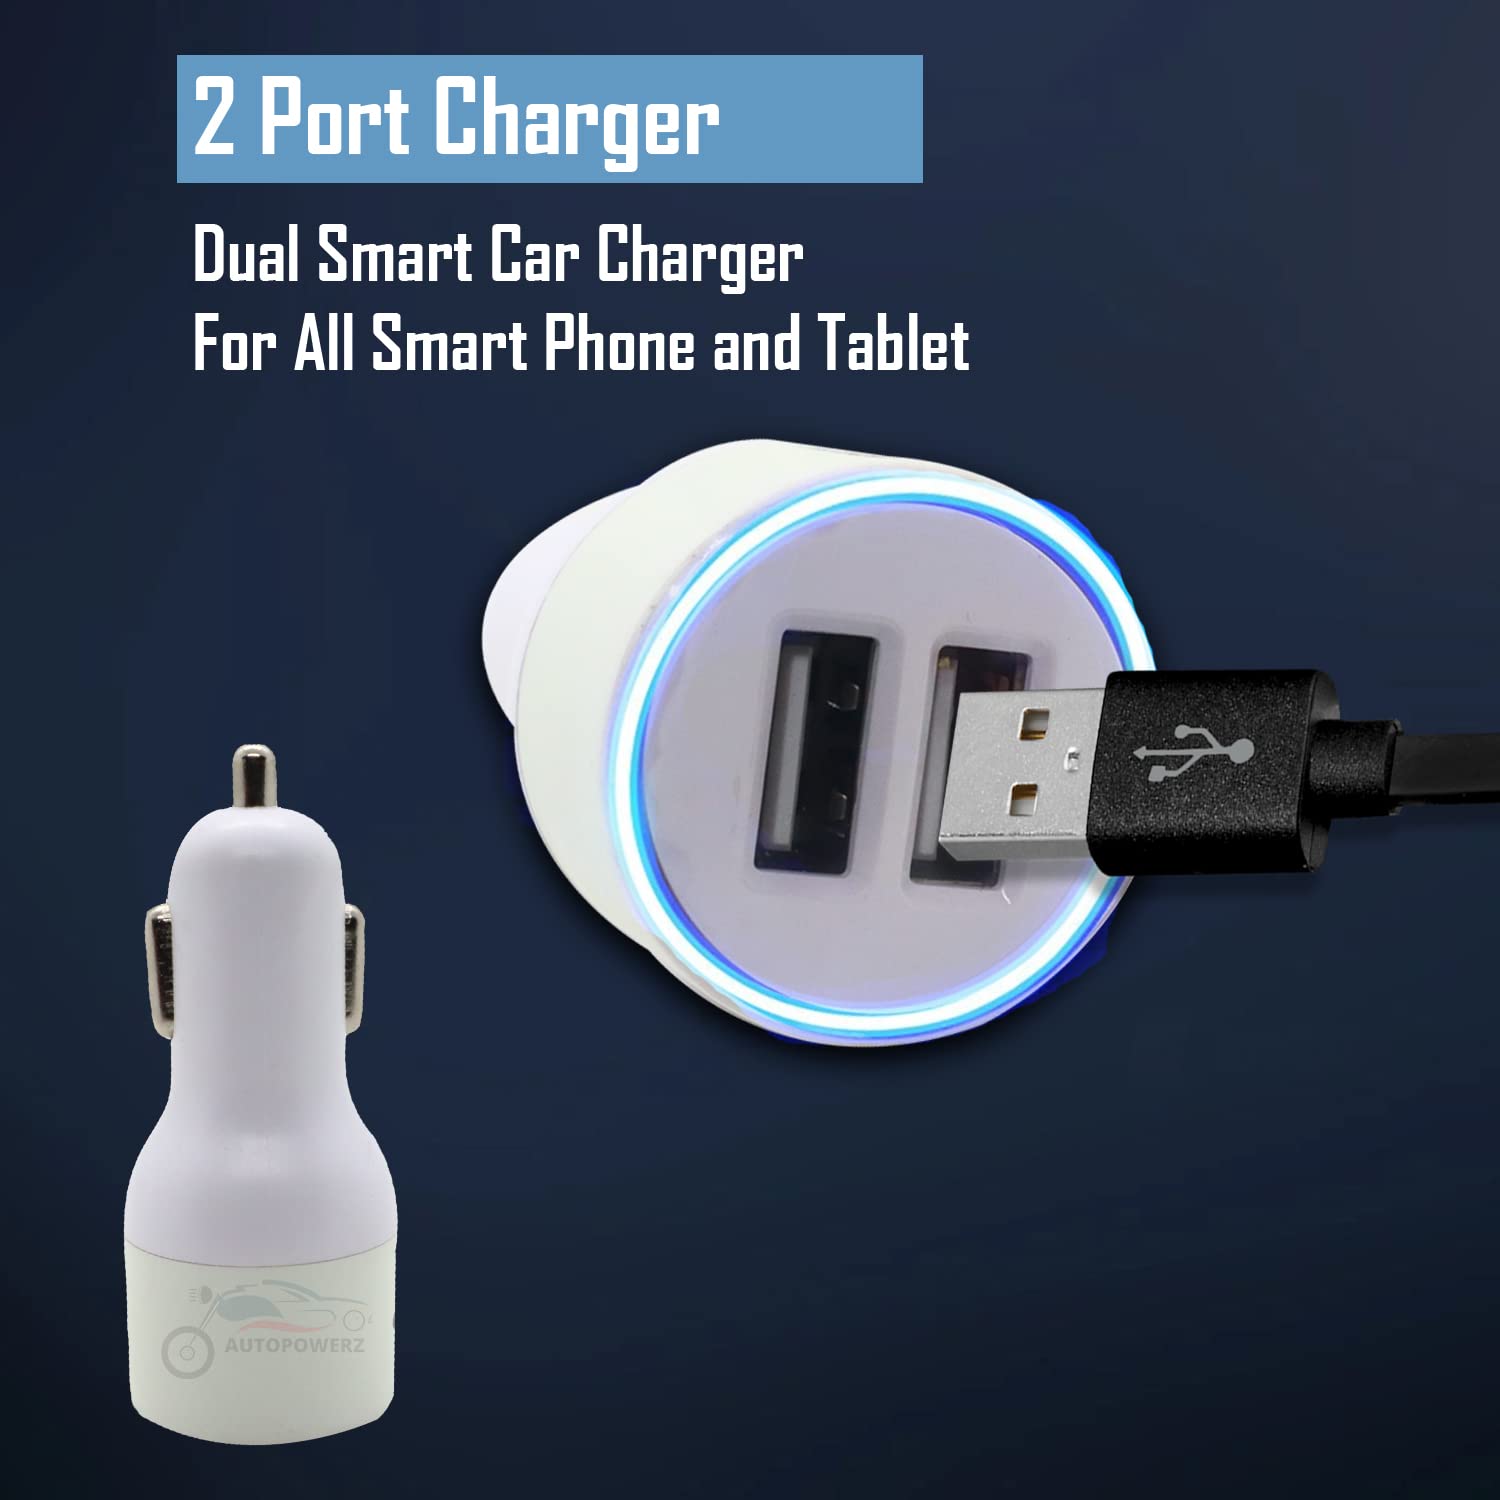 AUTOPOWERZ 4.2 A (2.1 and 2.1 Amp) 2 Port Fast Car Charger/Car Socket with (iPhone Data Cable) Comfortable with iPhone & Smartphone